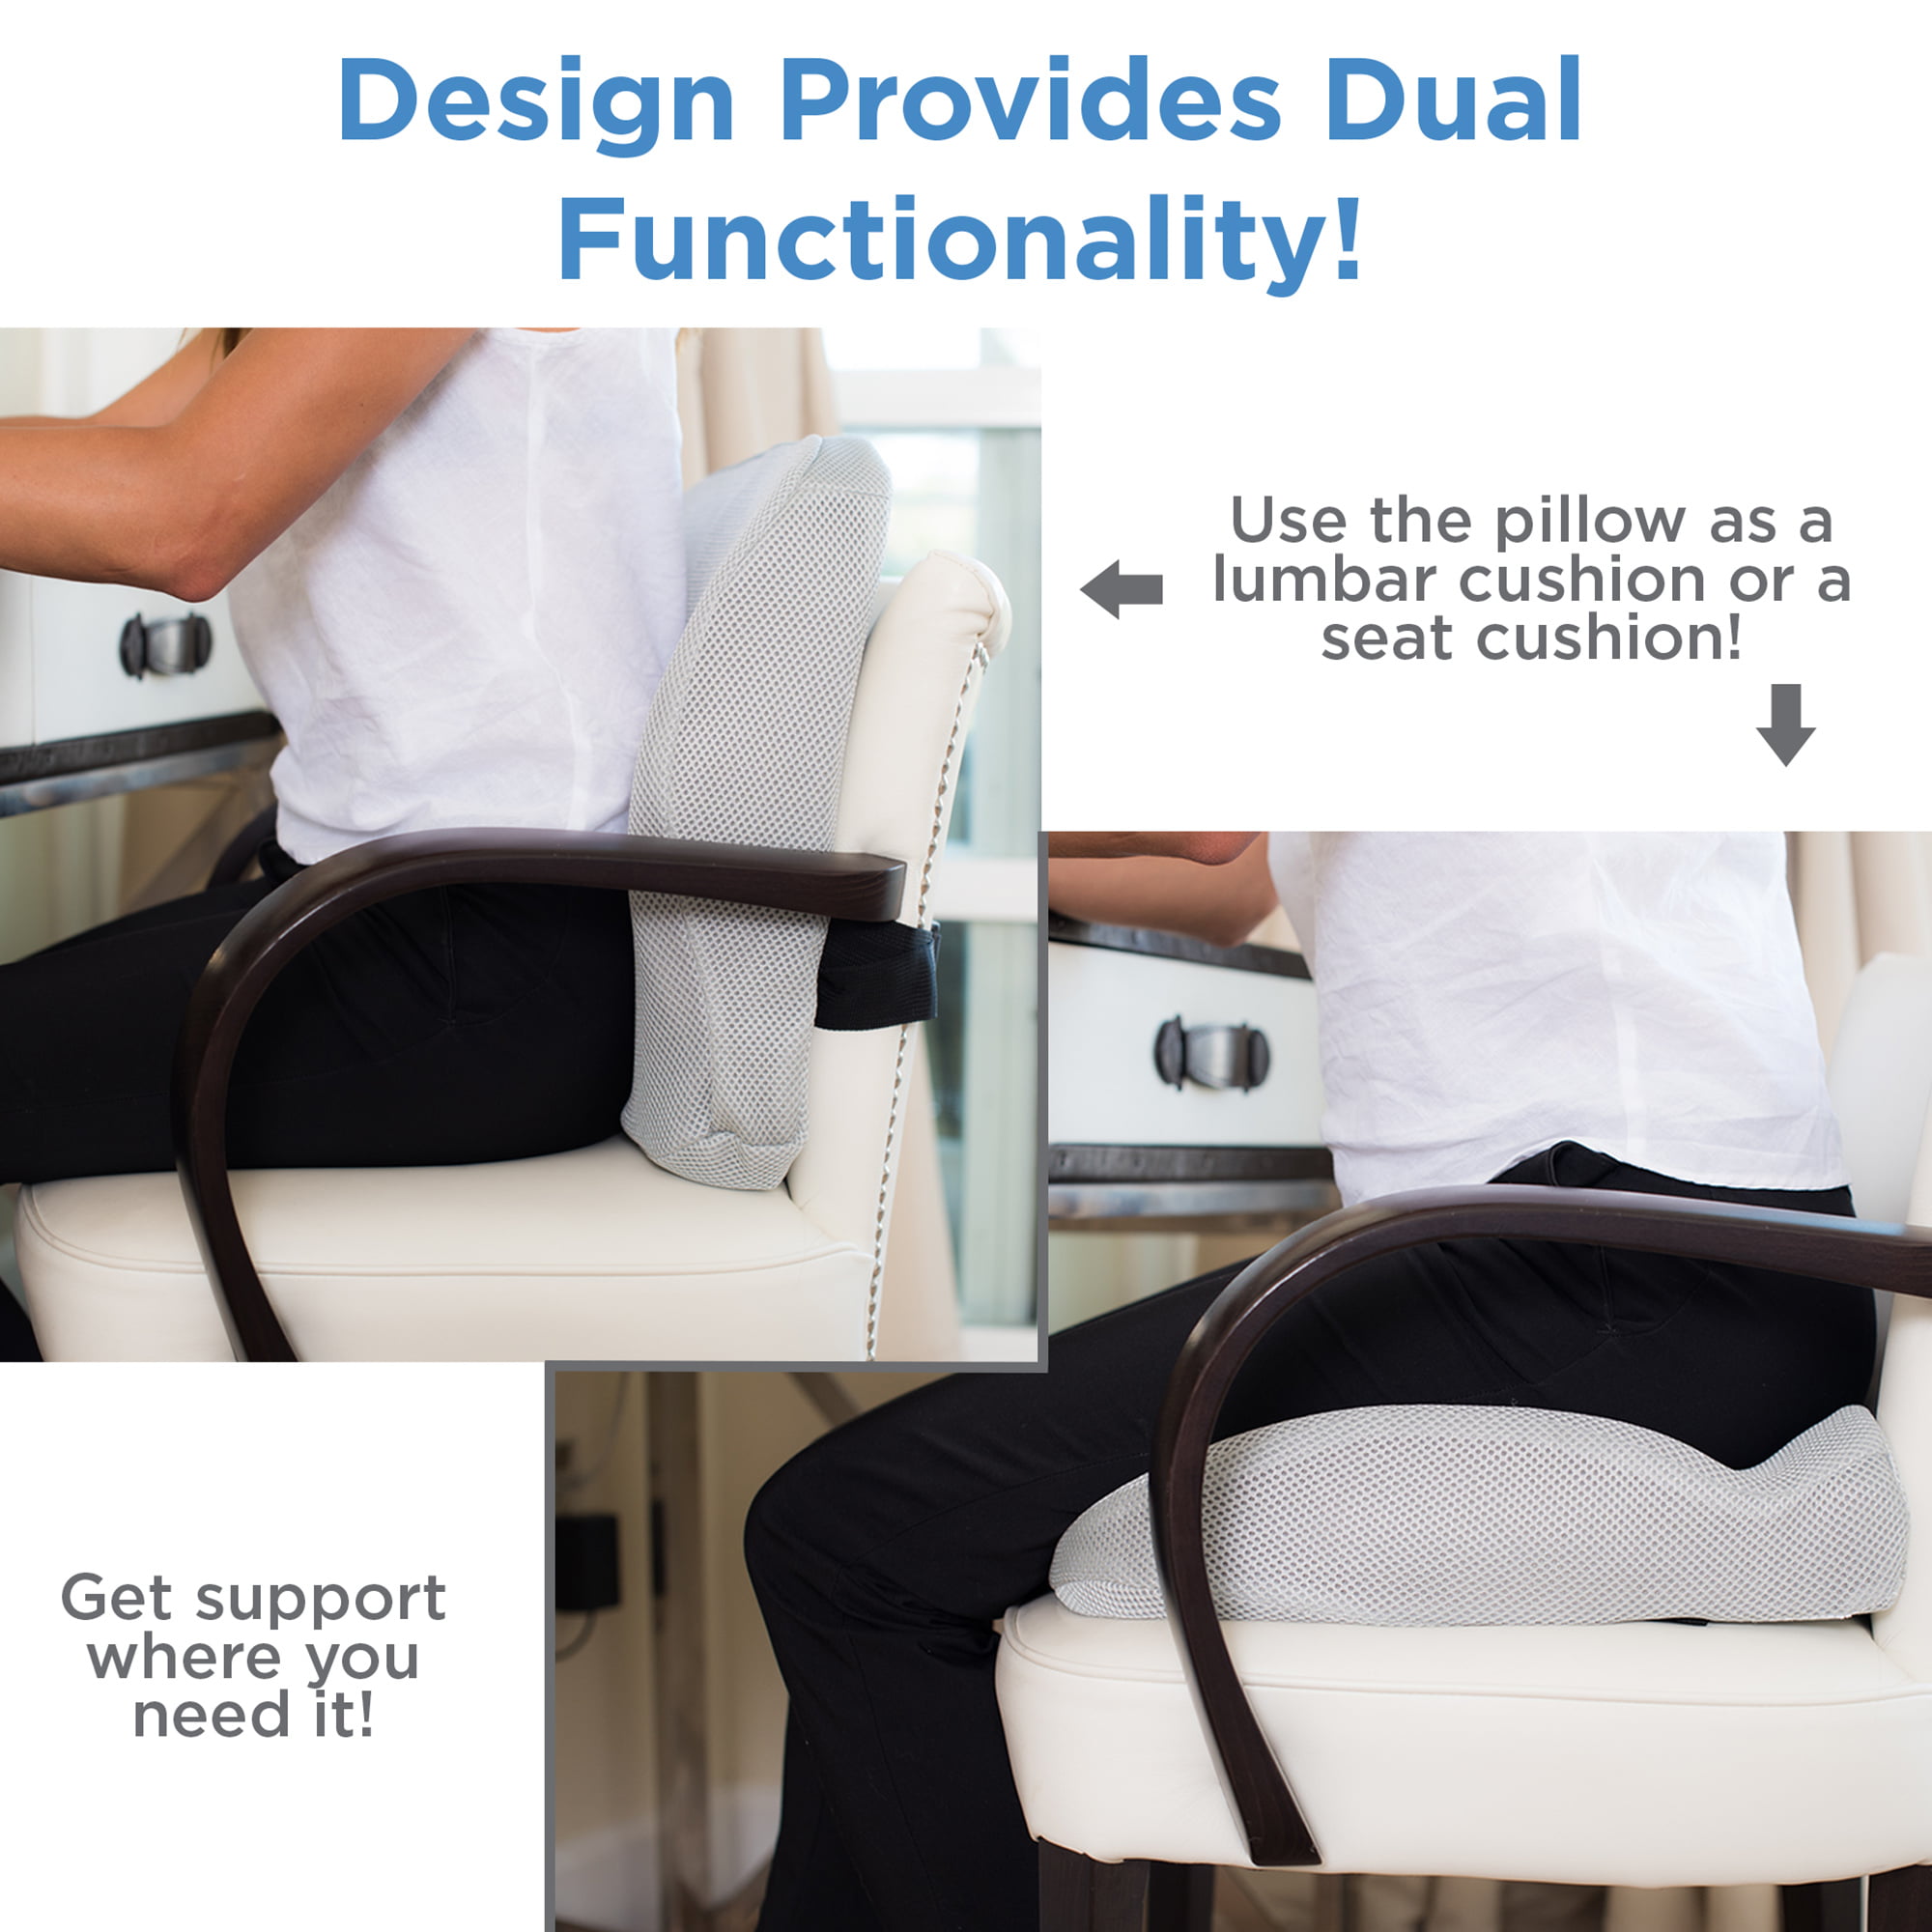 kasney Lumbar Support Pillow Ergonomic Memory Foam Lumbar Pillow, Relieve  Back Pain, CMFY Breathable & Detachable & Washable, Neo Cushion Lower Back